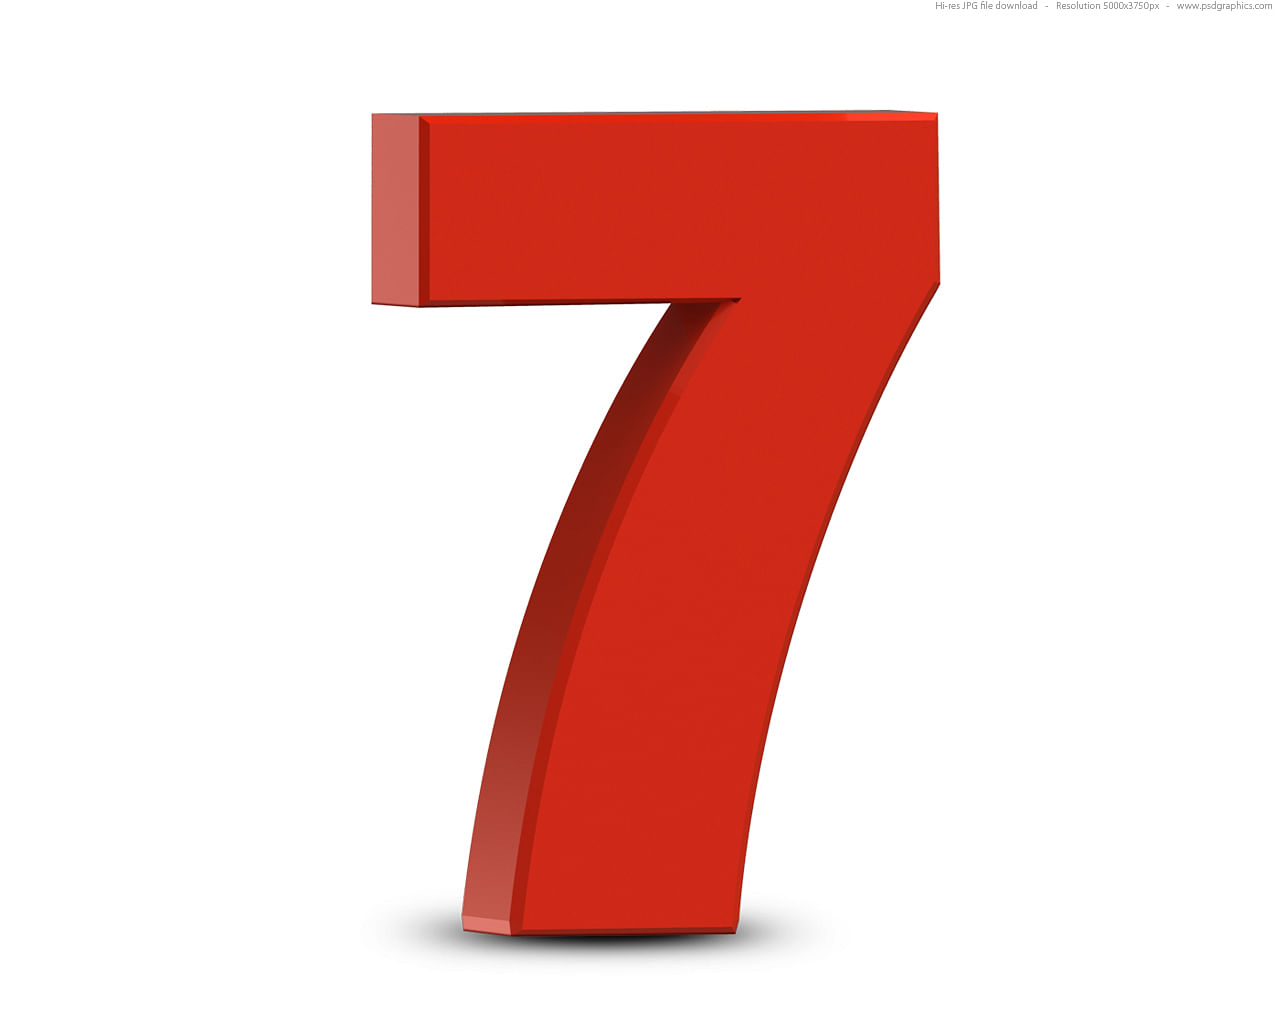 number 7 in indian numerology